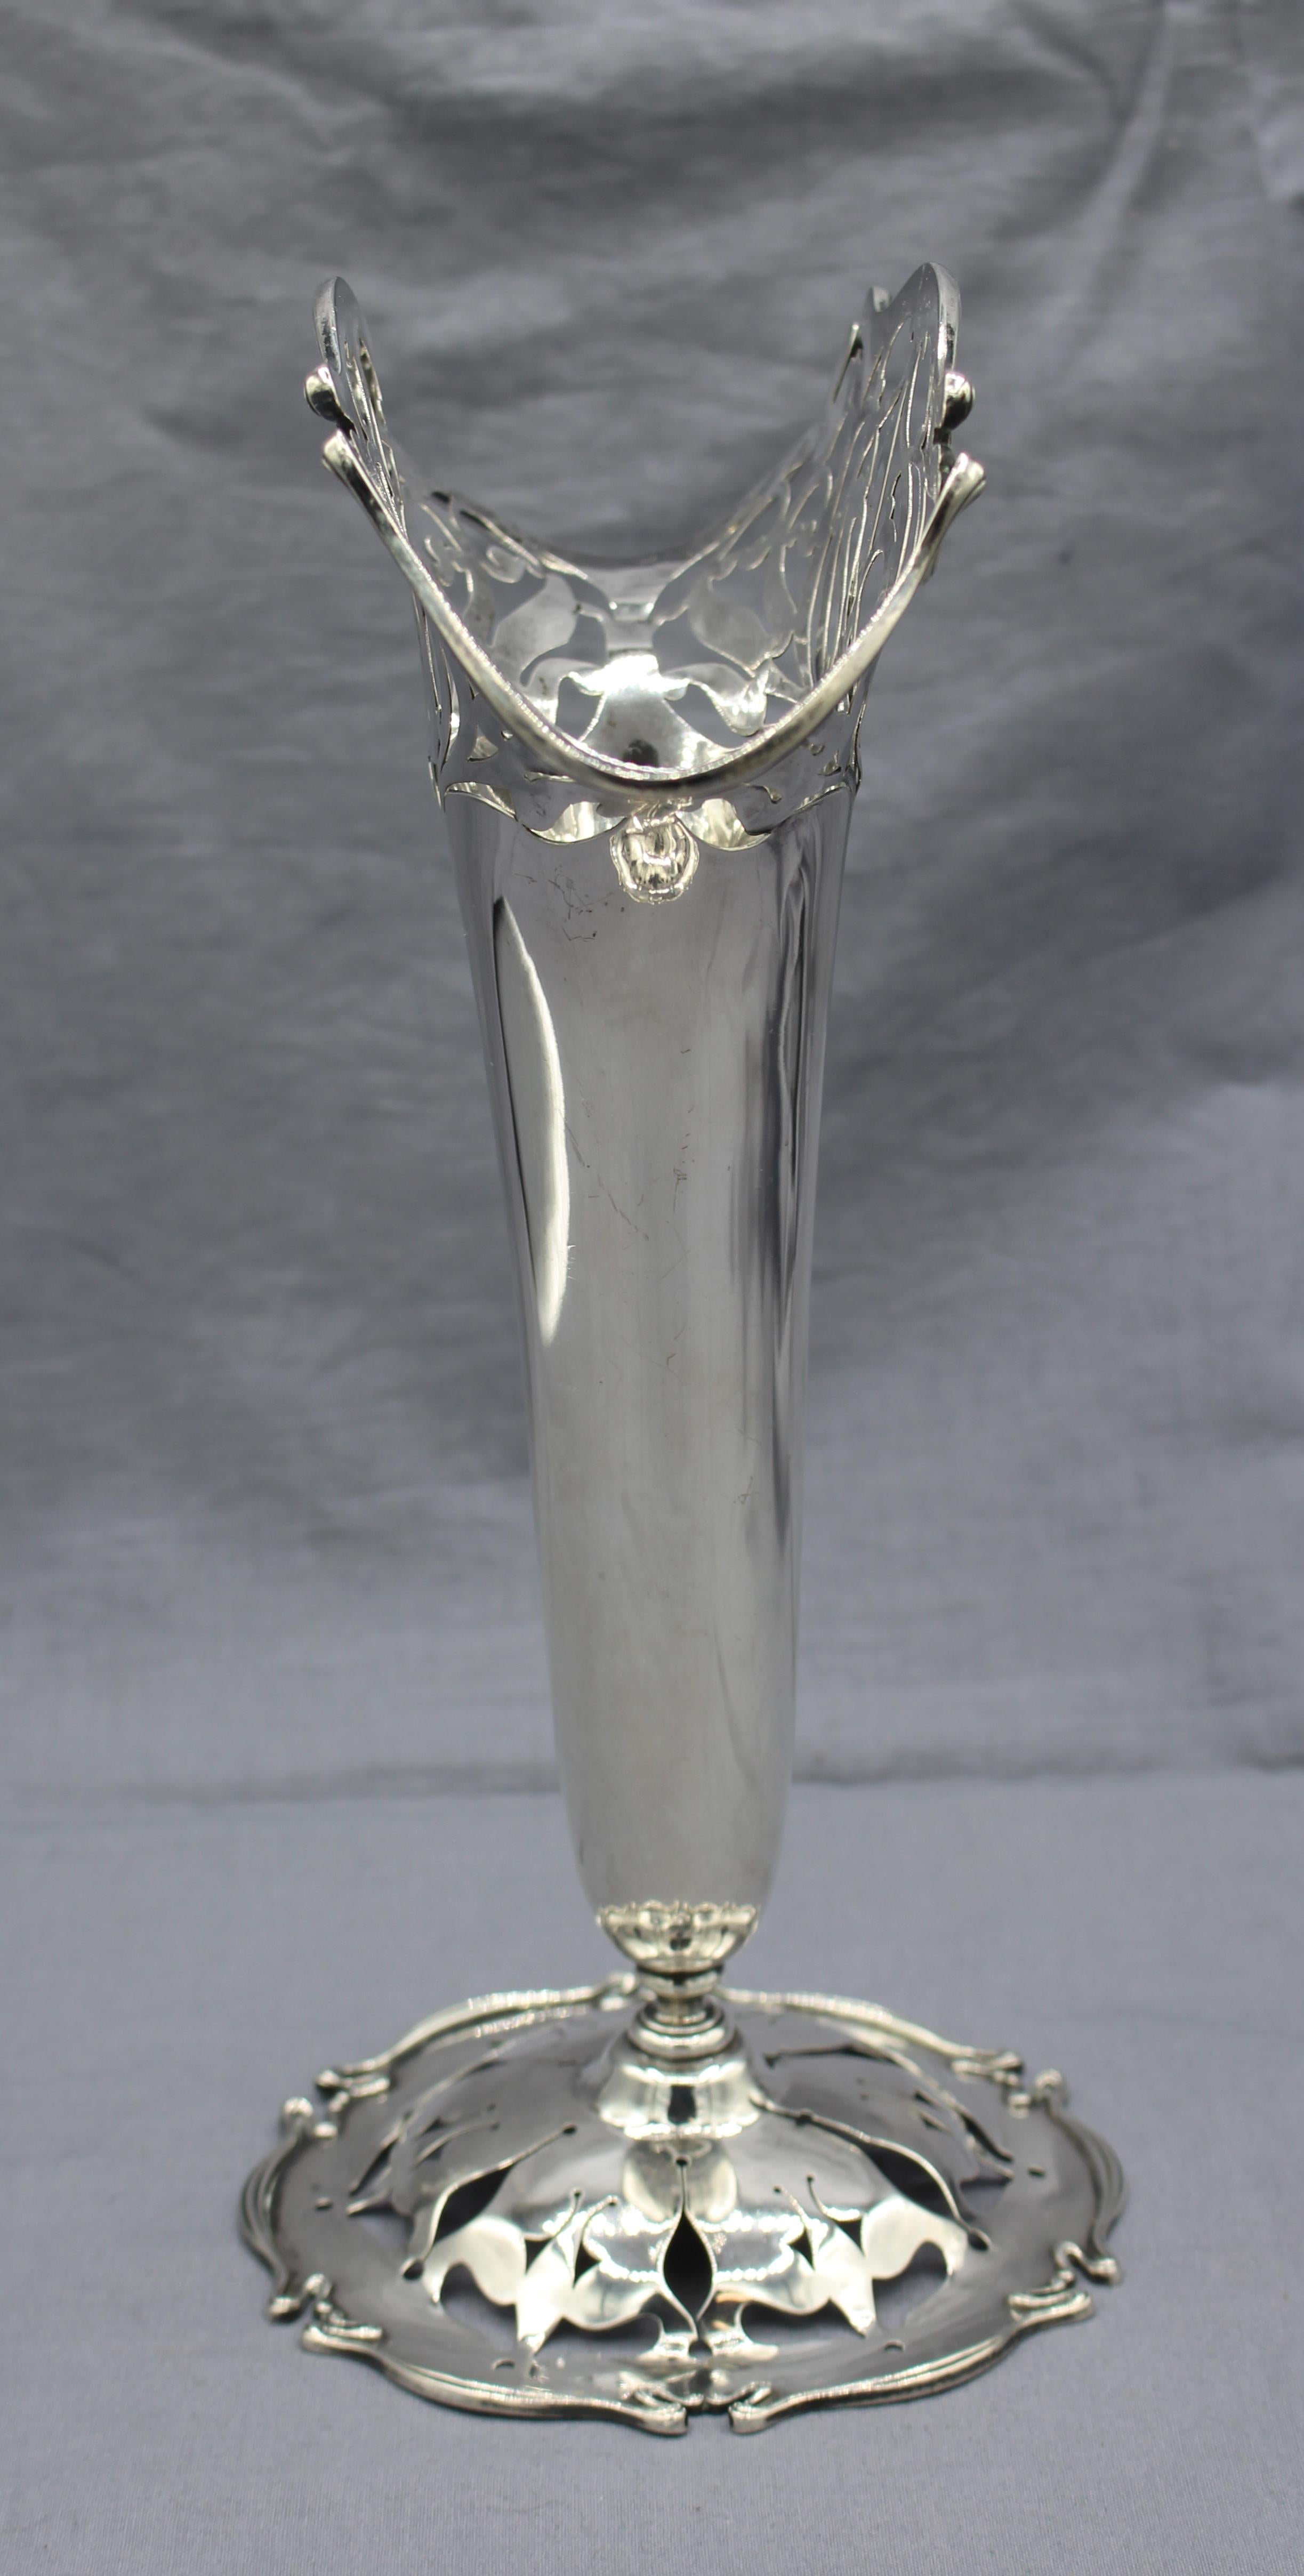 A quintessential Art Nouveau sterling silver vase by Frank Smith, Gardner, MA. The swirling base & lip moldings are perfection. The cut work motifs play on the movement of the moldings. 8.8 troy oz.
Measures: 10